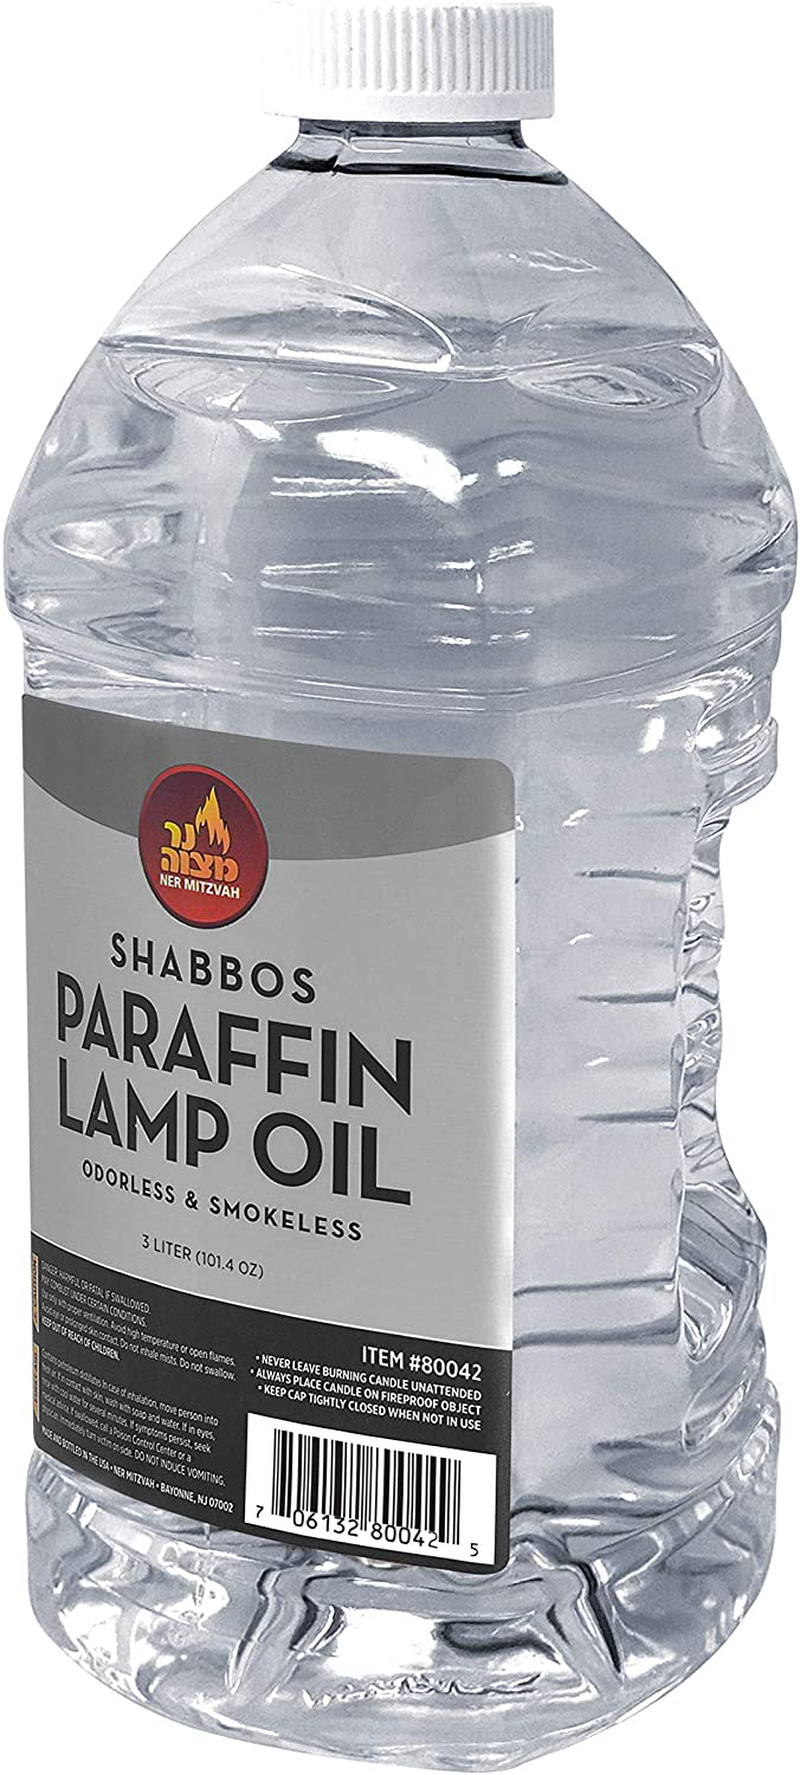 Ner Mitzvah Paraffin Lamp Oil - Clear Smokeless, Odorless, Clean Burning Fuel for Indoor and Outdoor Use - 2 Liter (67.6 oz) Home & Garden > Lighting Accessories > Oil Lamp Fuel Ner Mitzvah Default Title  